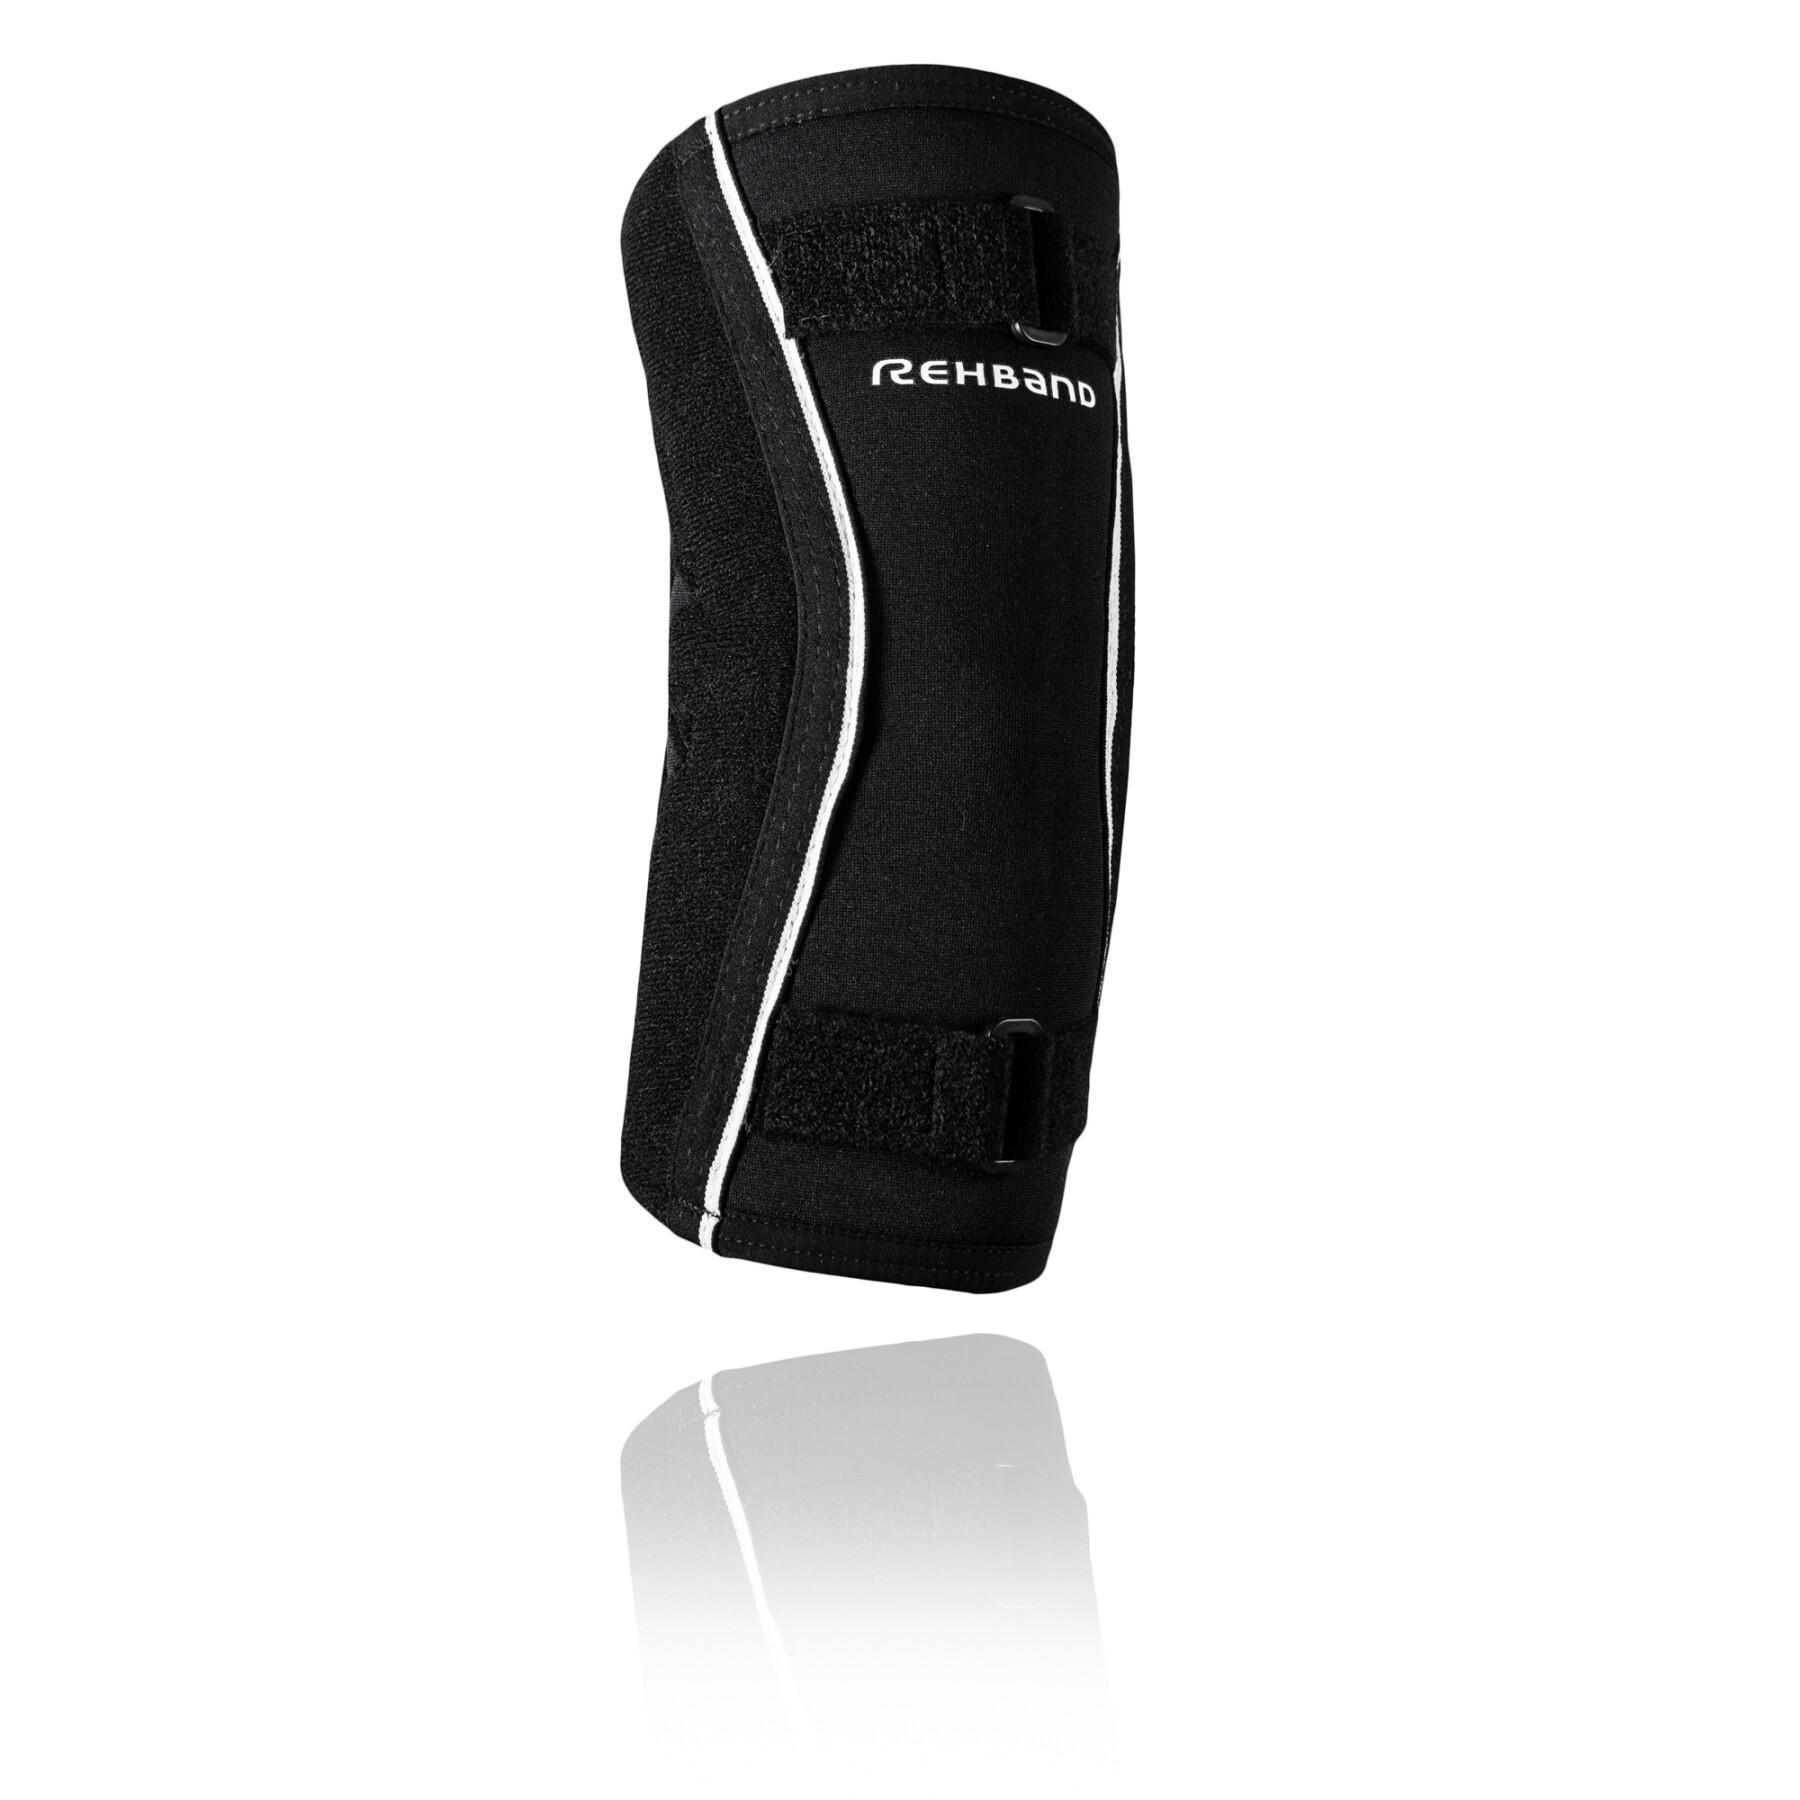 Hyper-x elbow pads Rehband Ud line